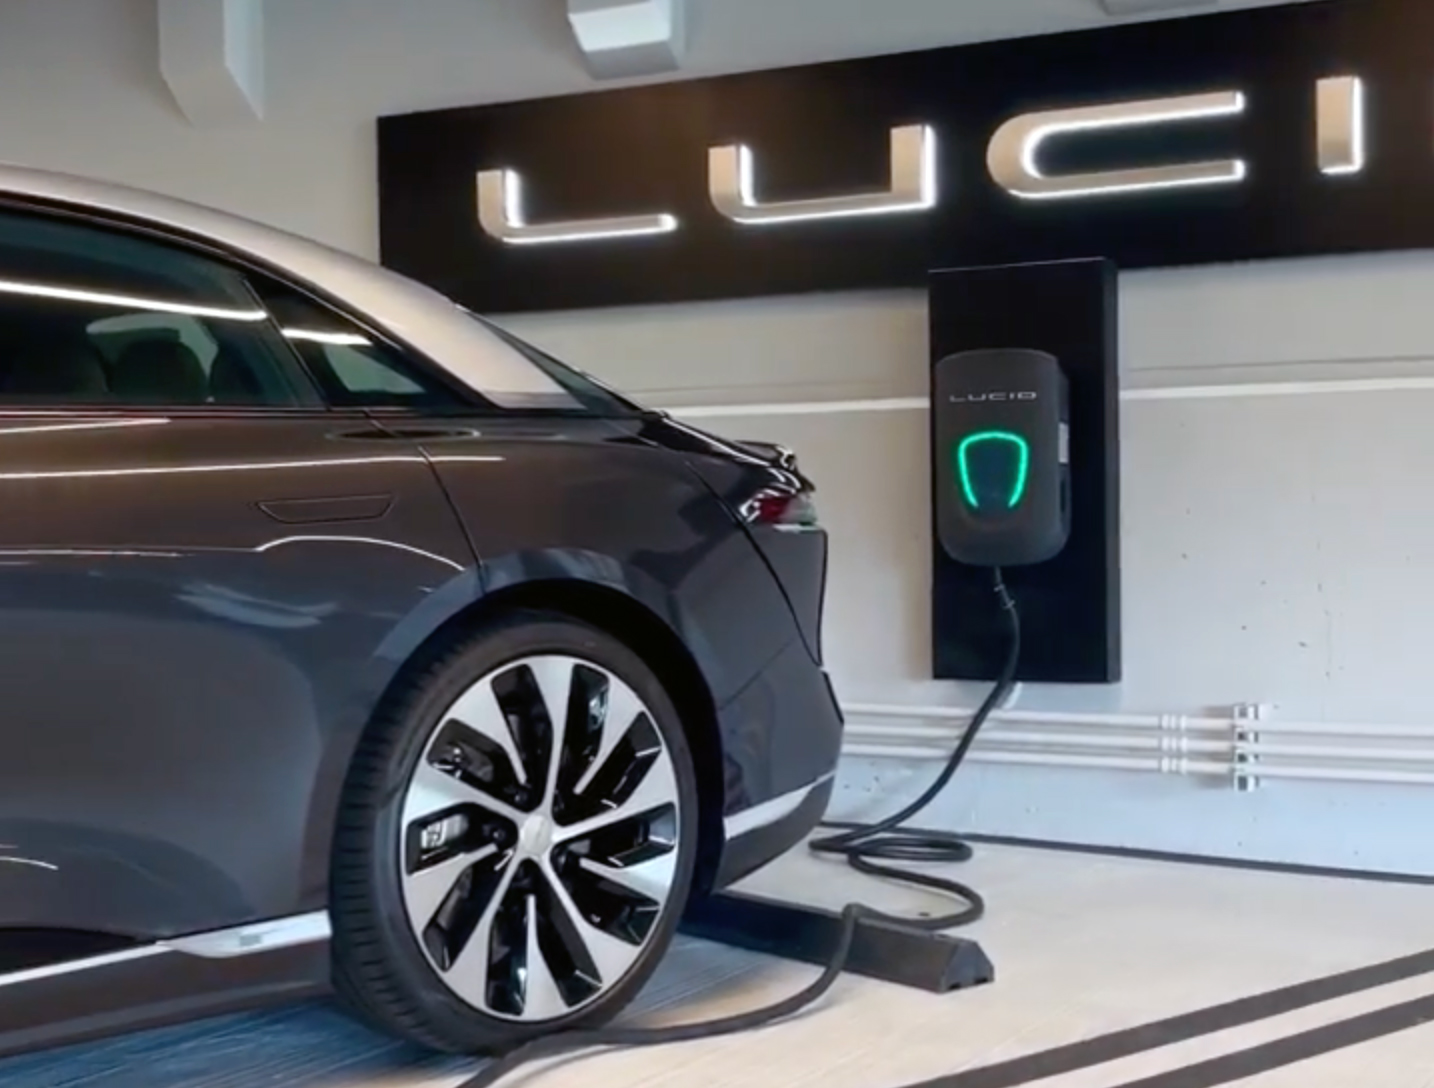 Lucid Motors Shows The Connected Home Charging Station In Action